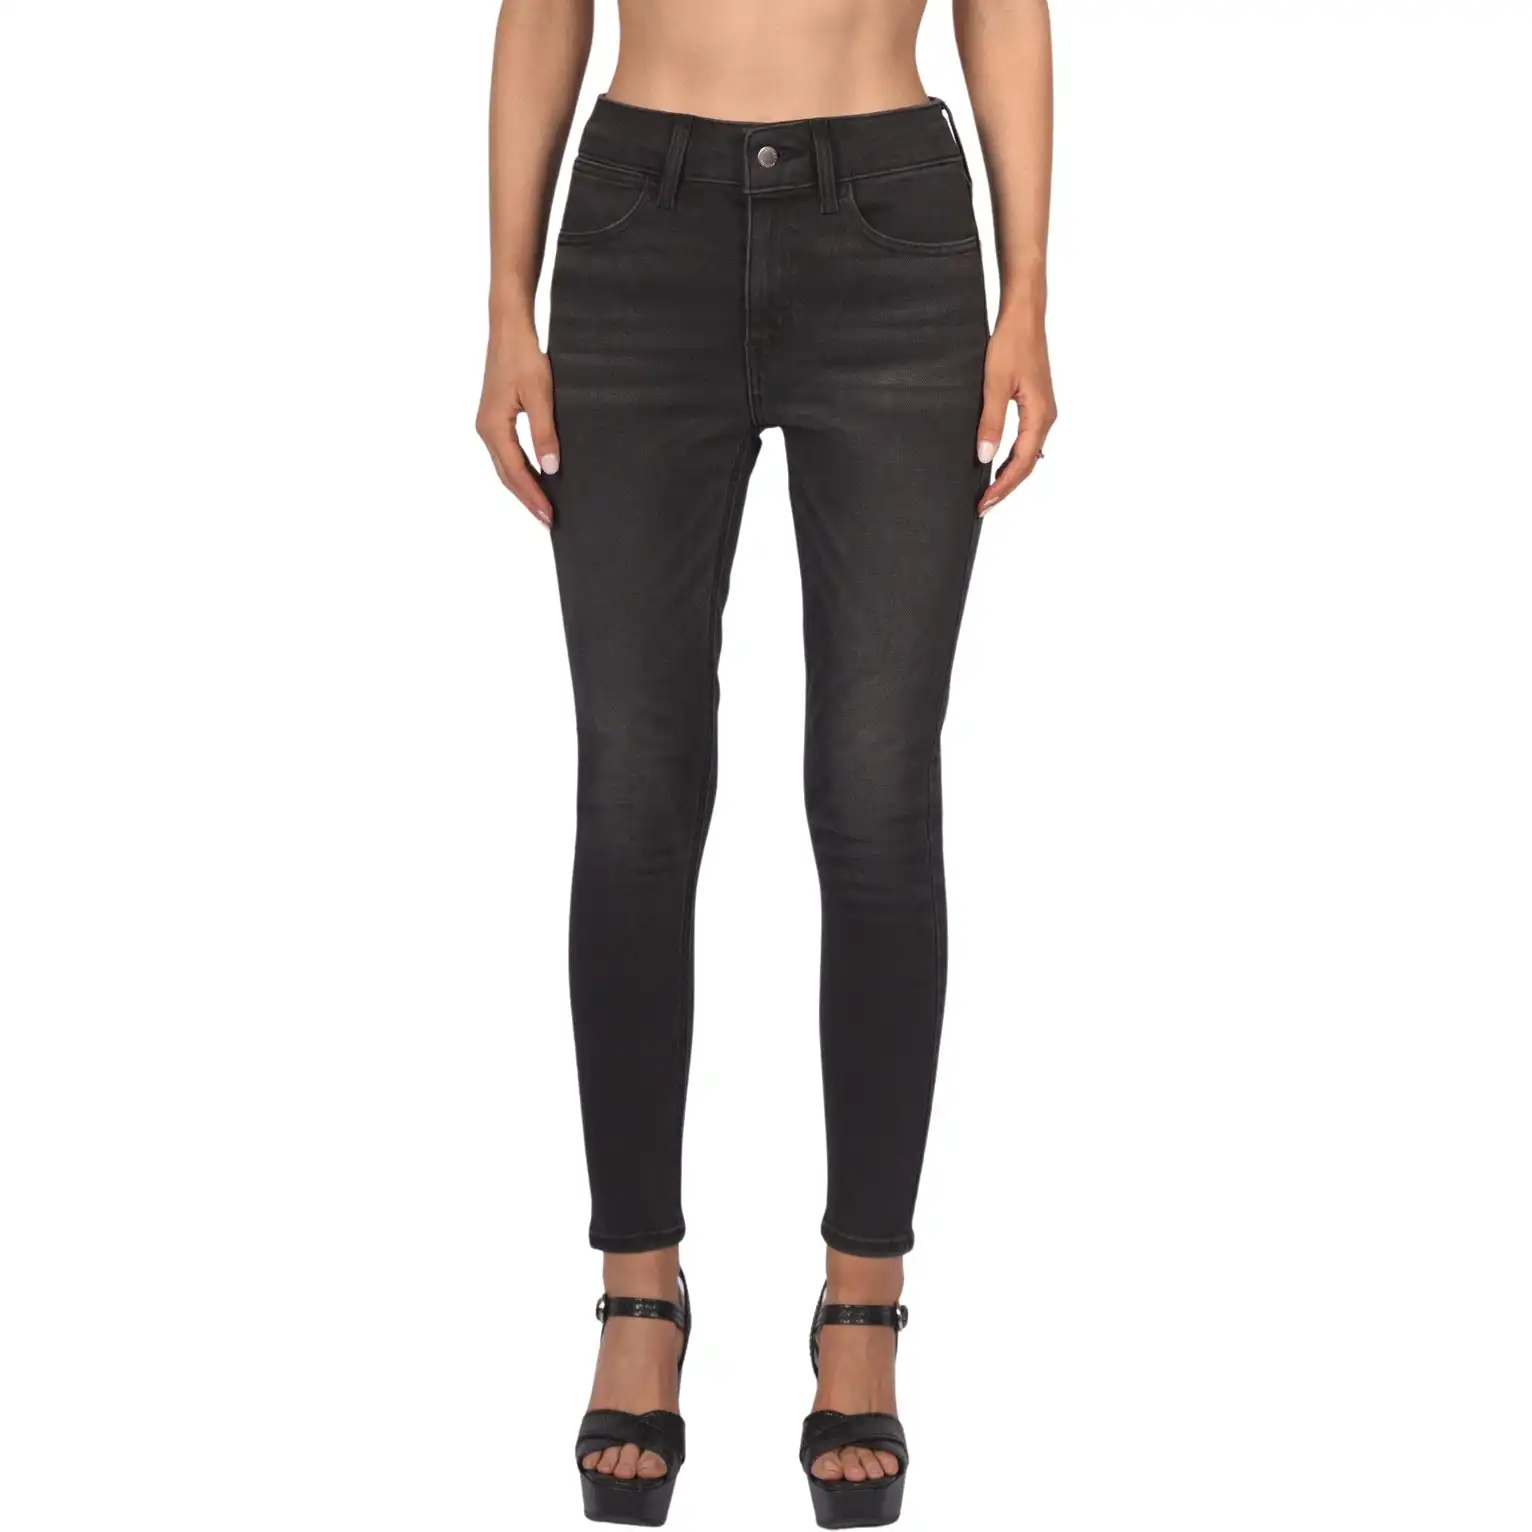 Topshop Women's 'Topshop Four' Black Faded Skinny Jeans